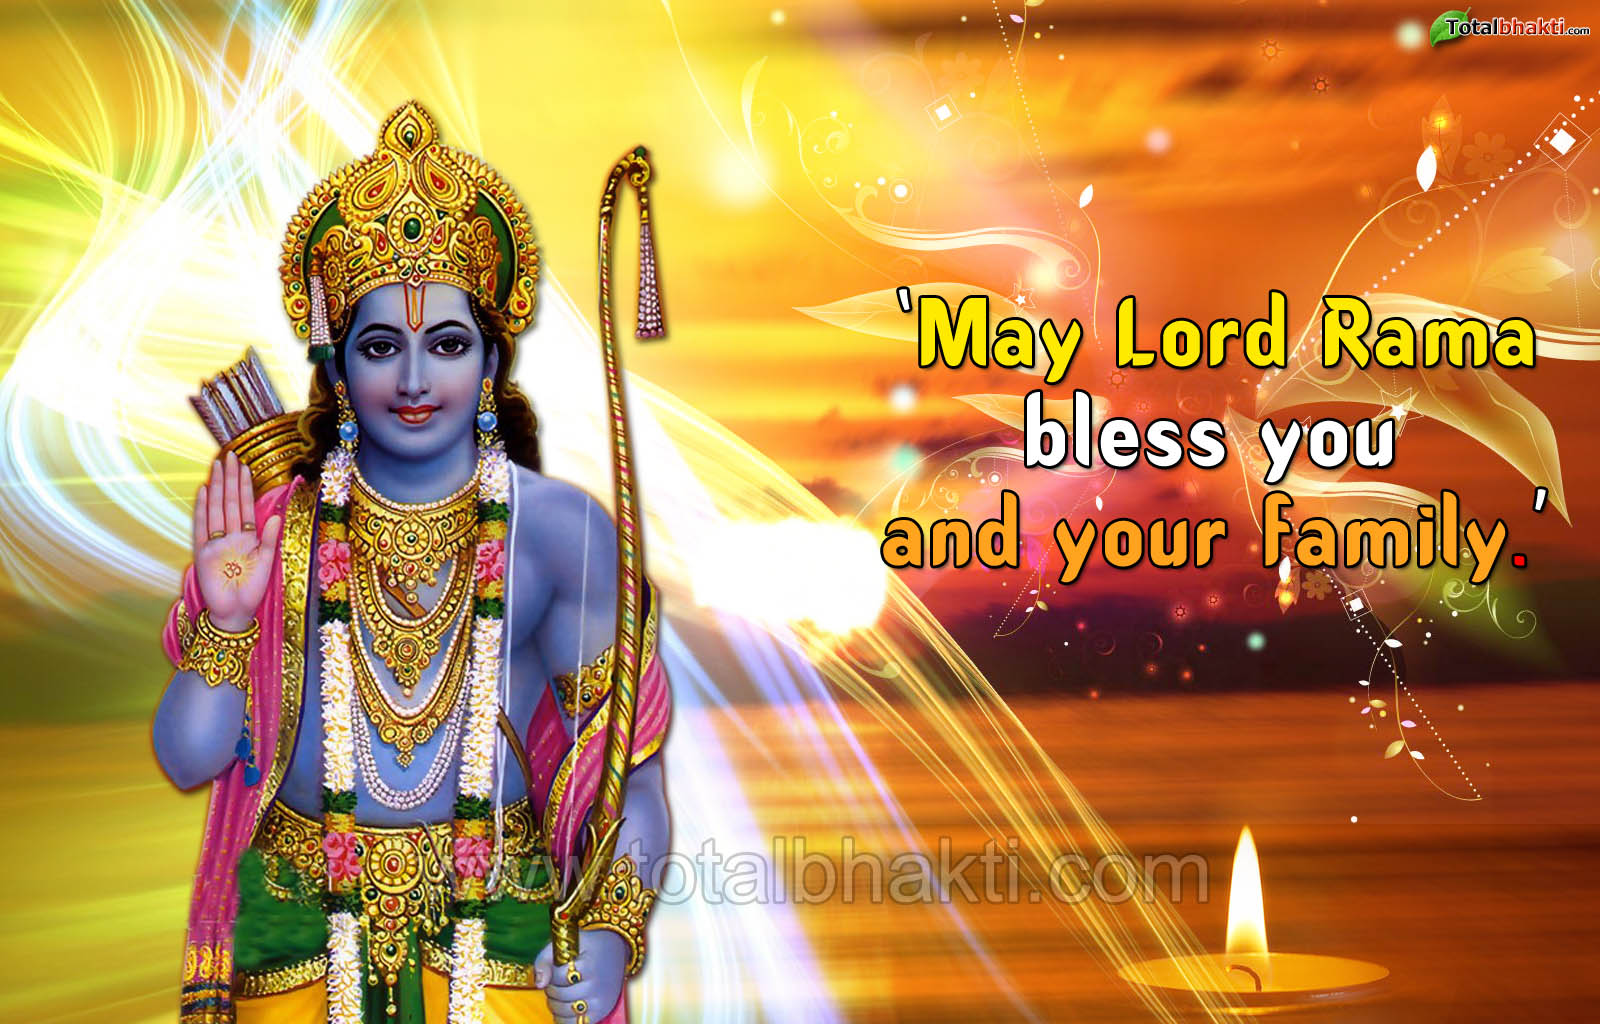 Sri Rama Navami - Greeting Cads Designs, Wishes and Backgrounds